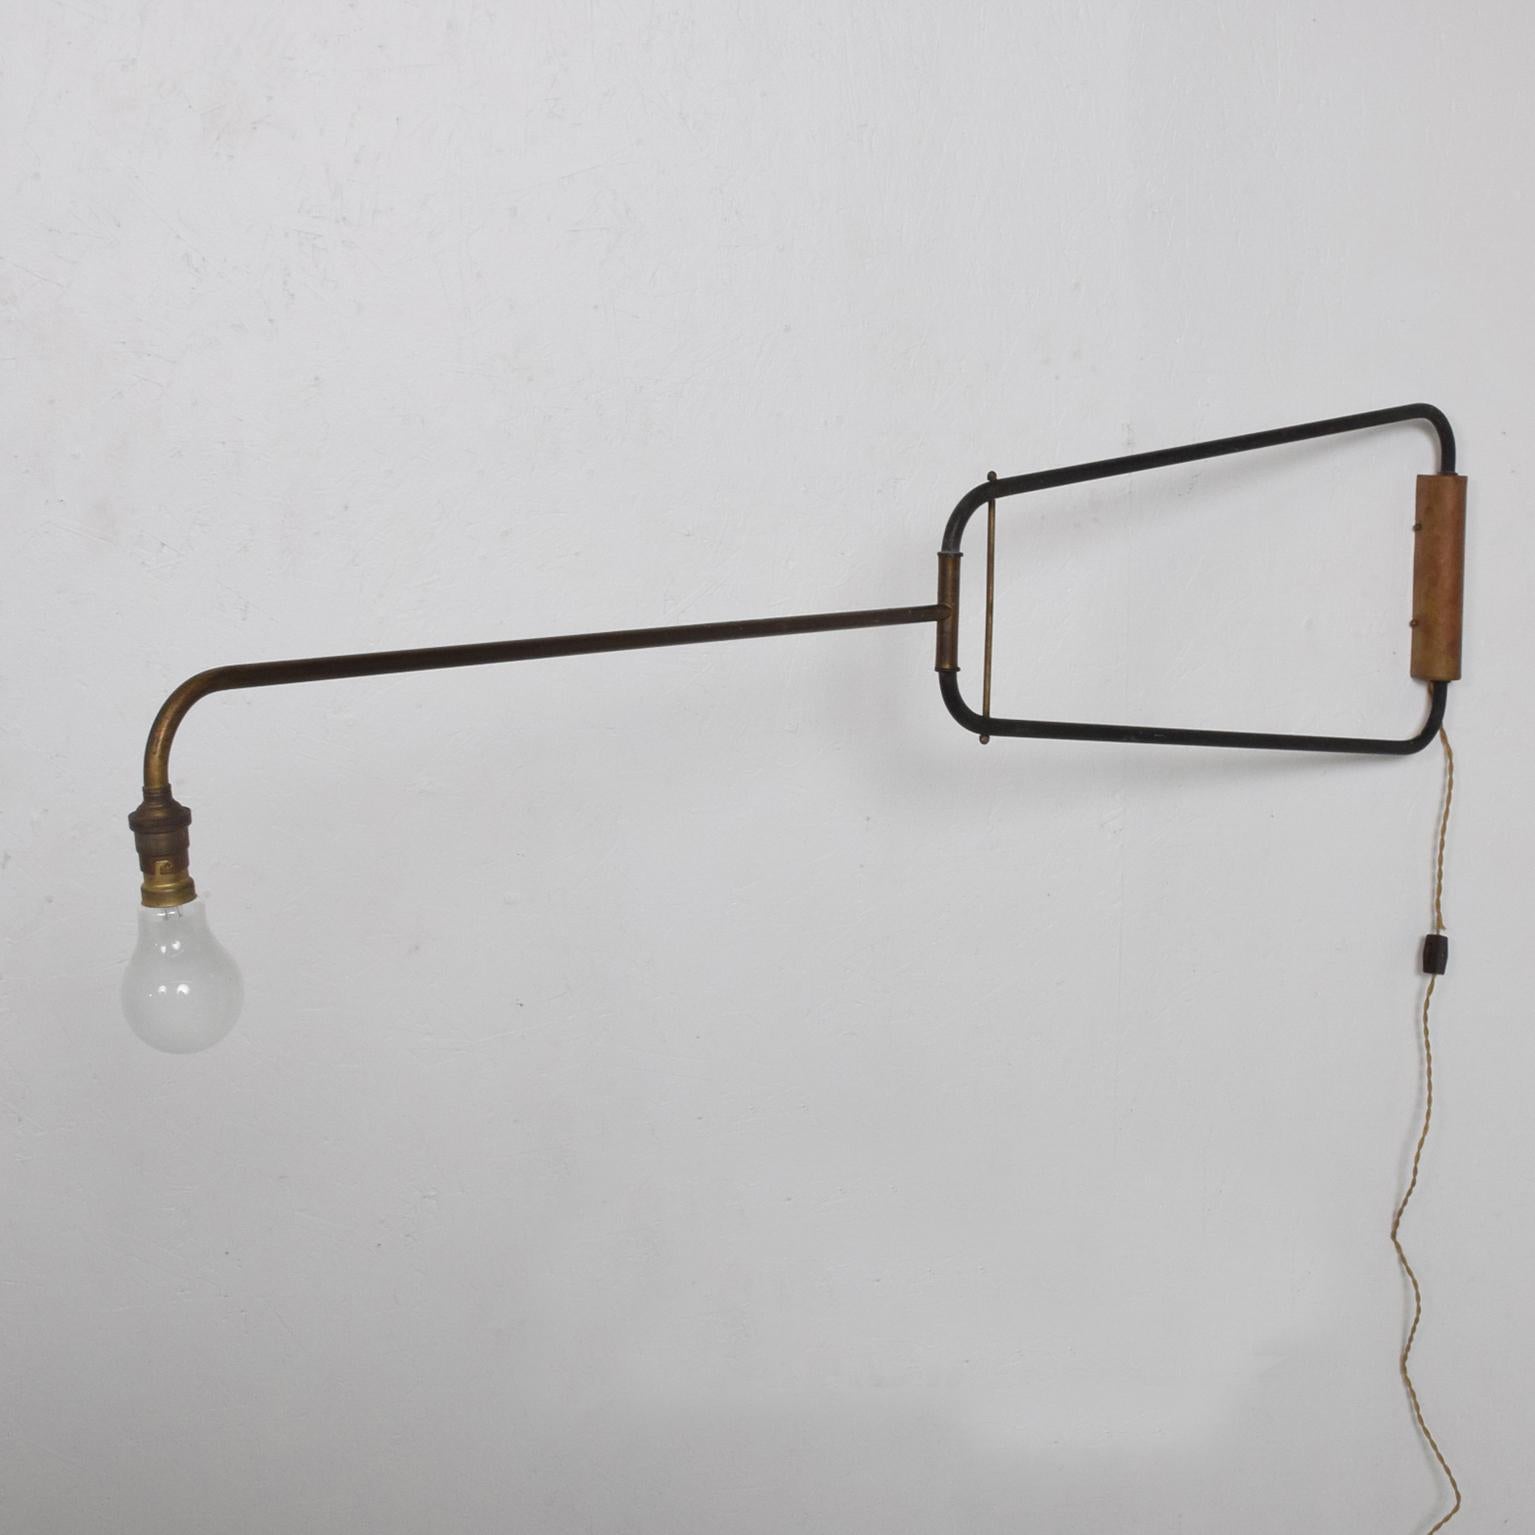 In the manner of Jean Prouvé a vintage industrial wall sconce, France, circa 1950s.

Simplicity in suspension. Minimalist design. Patinated brass. Bayonet bulb exposed. Dimensions: 52 1/4